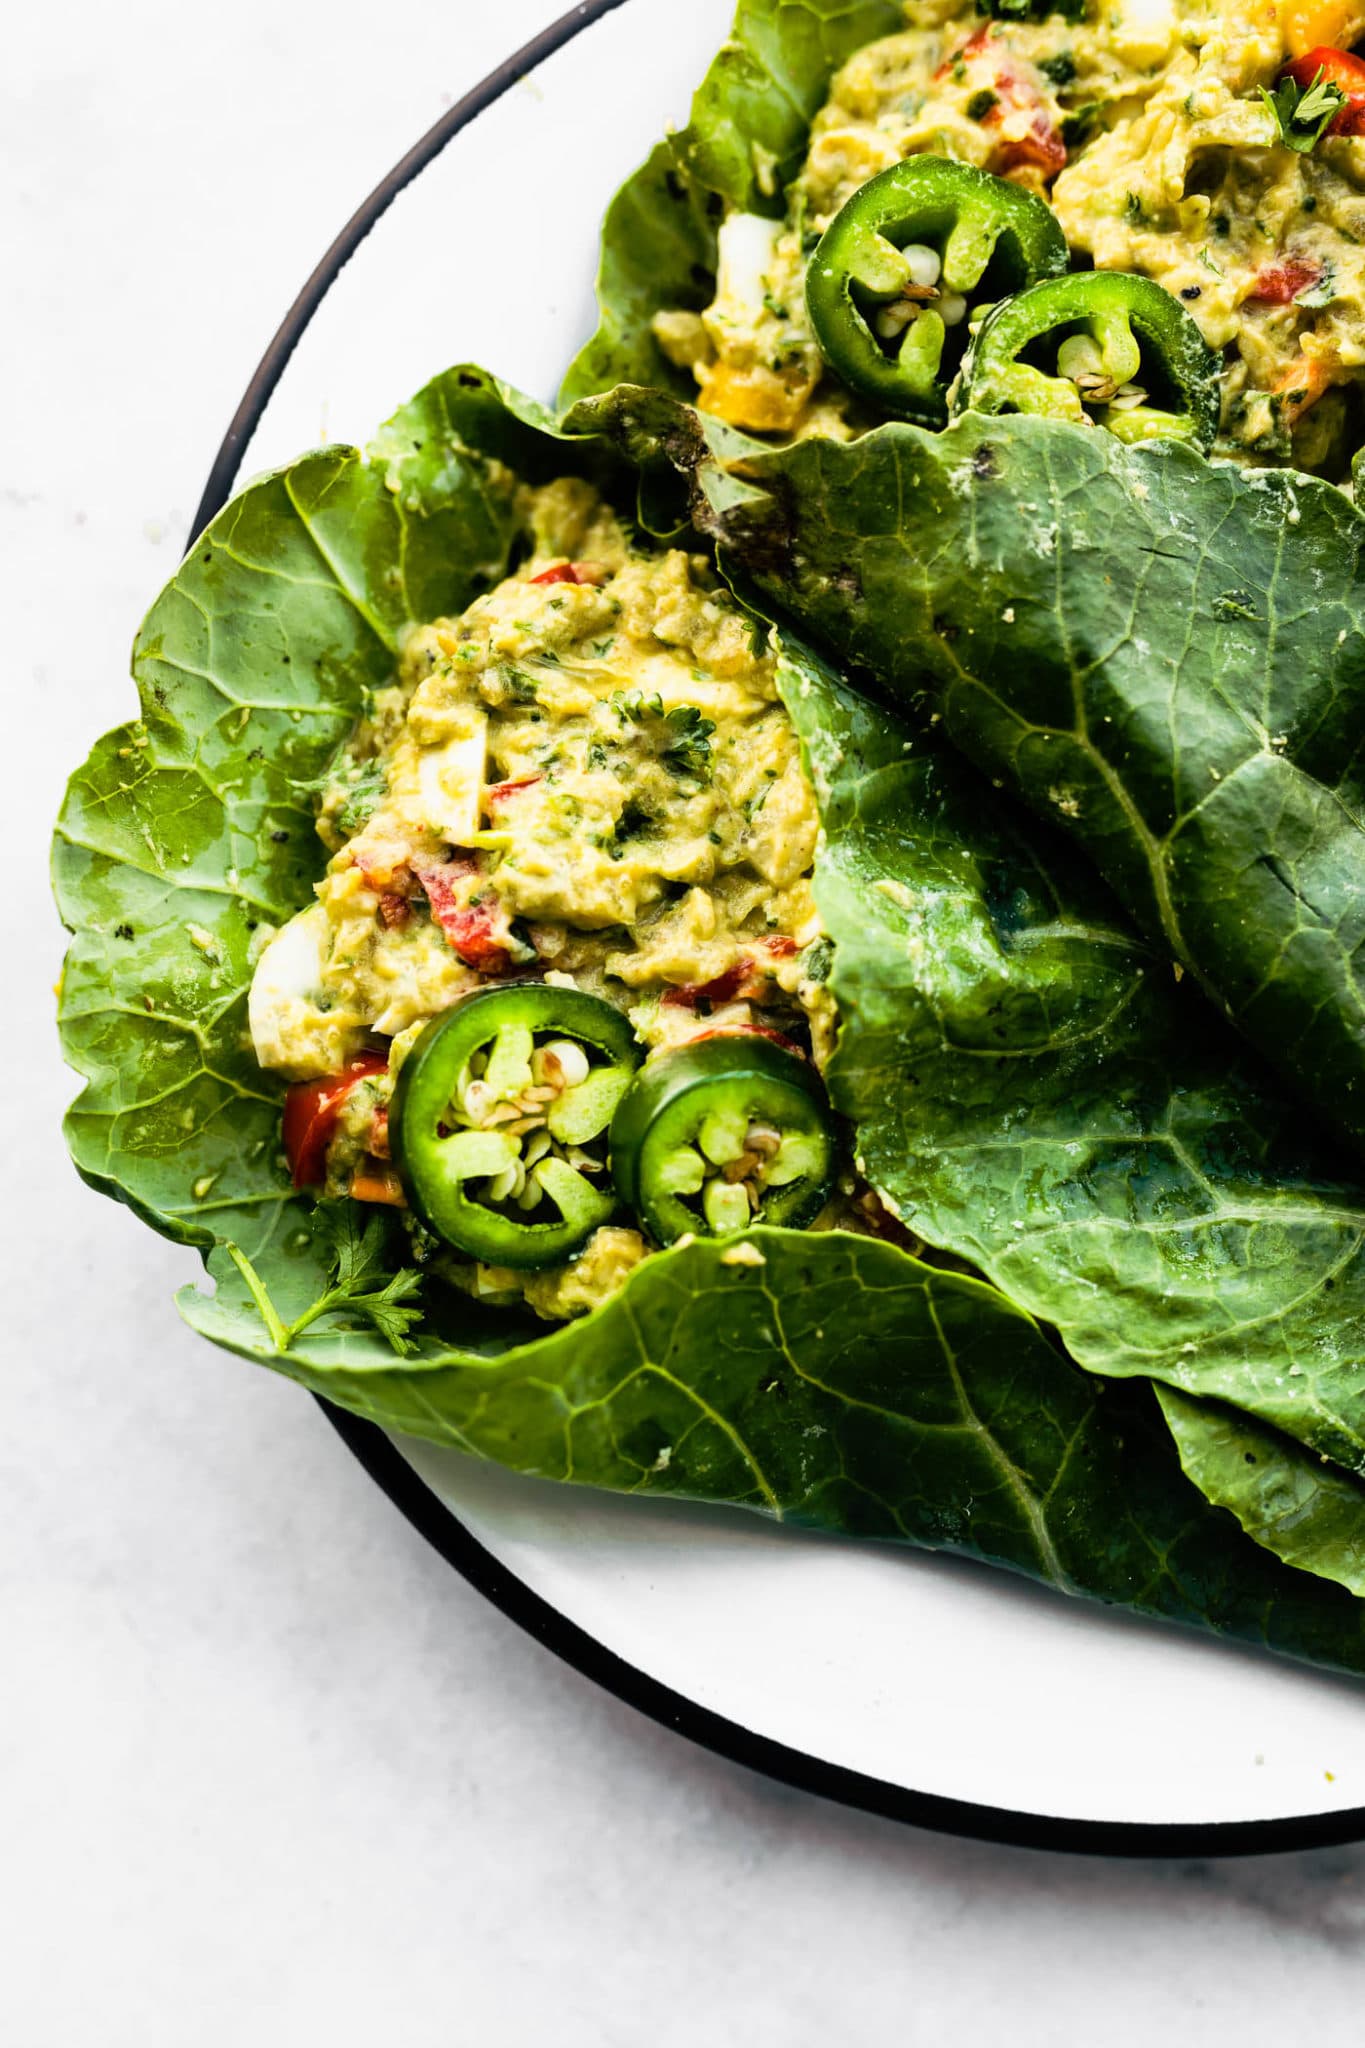 close up image of Mexican avocado egg salad wraps in collard greens